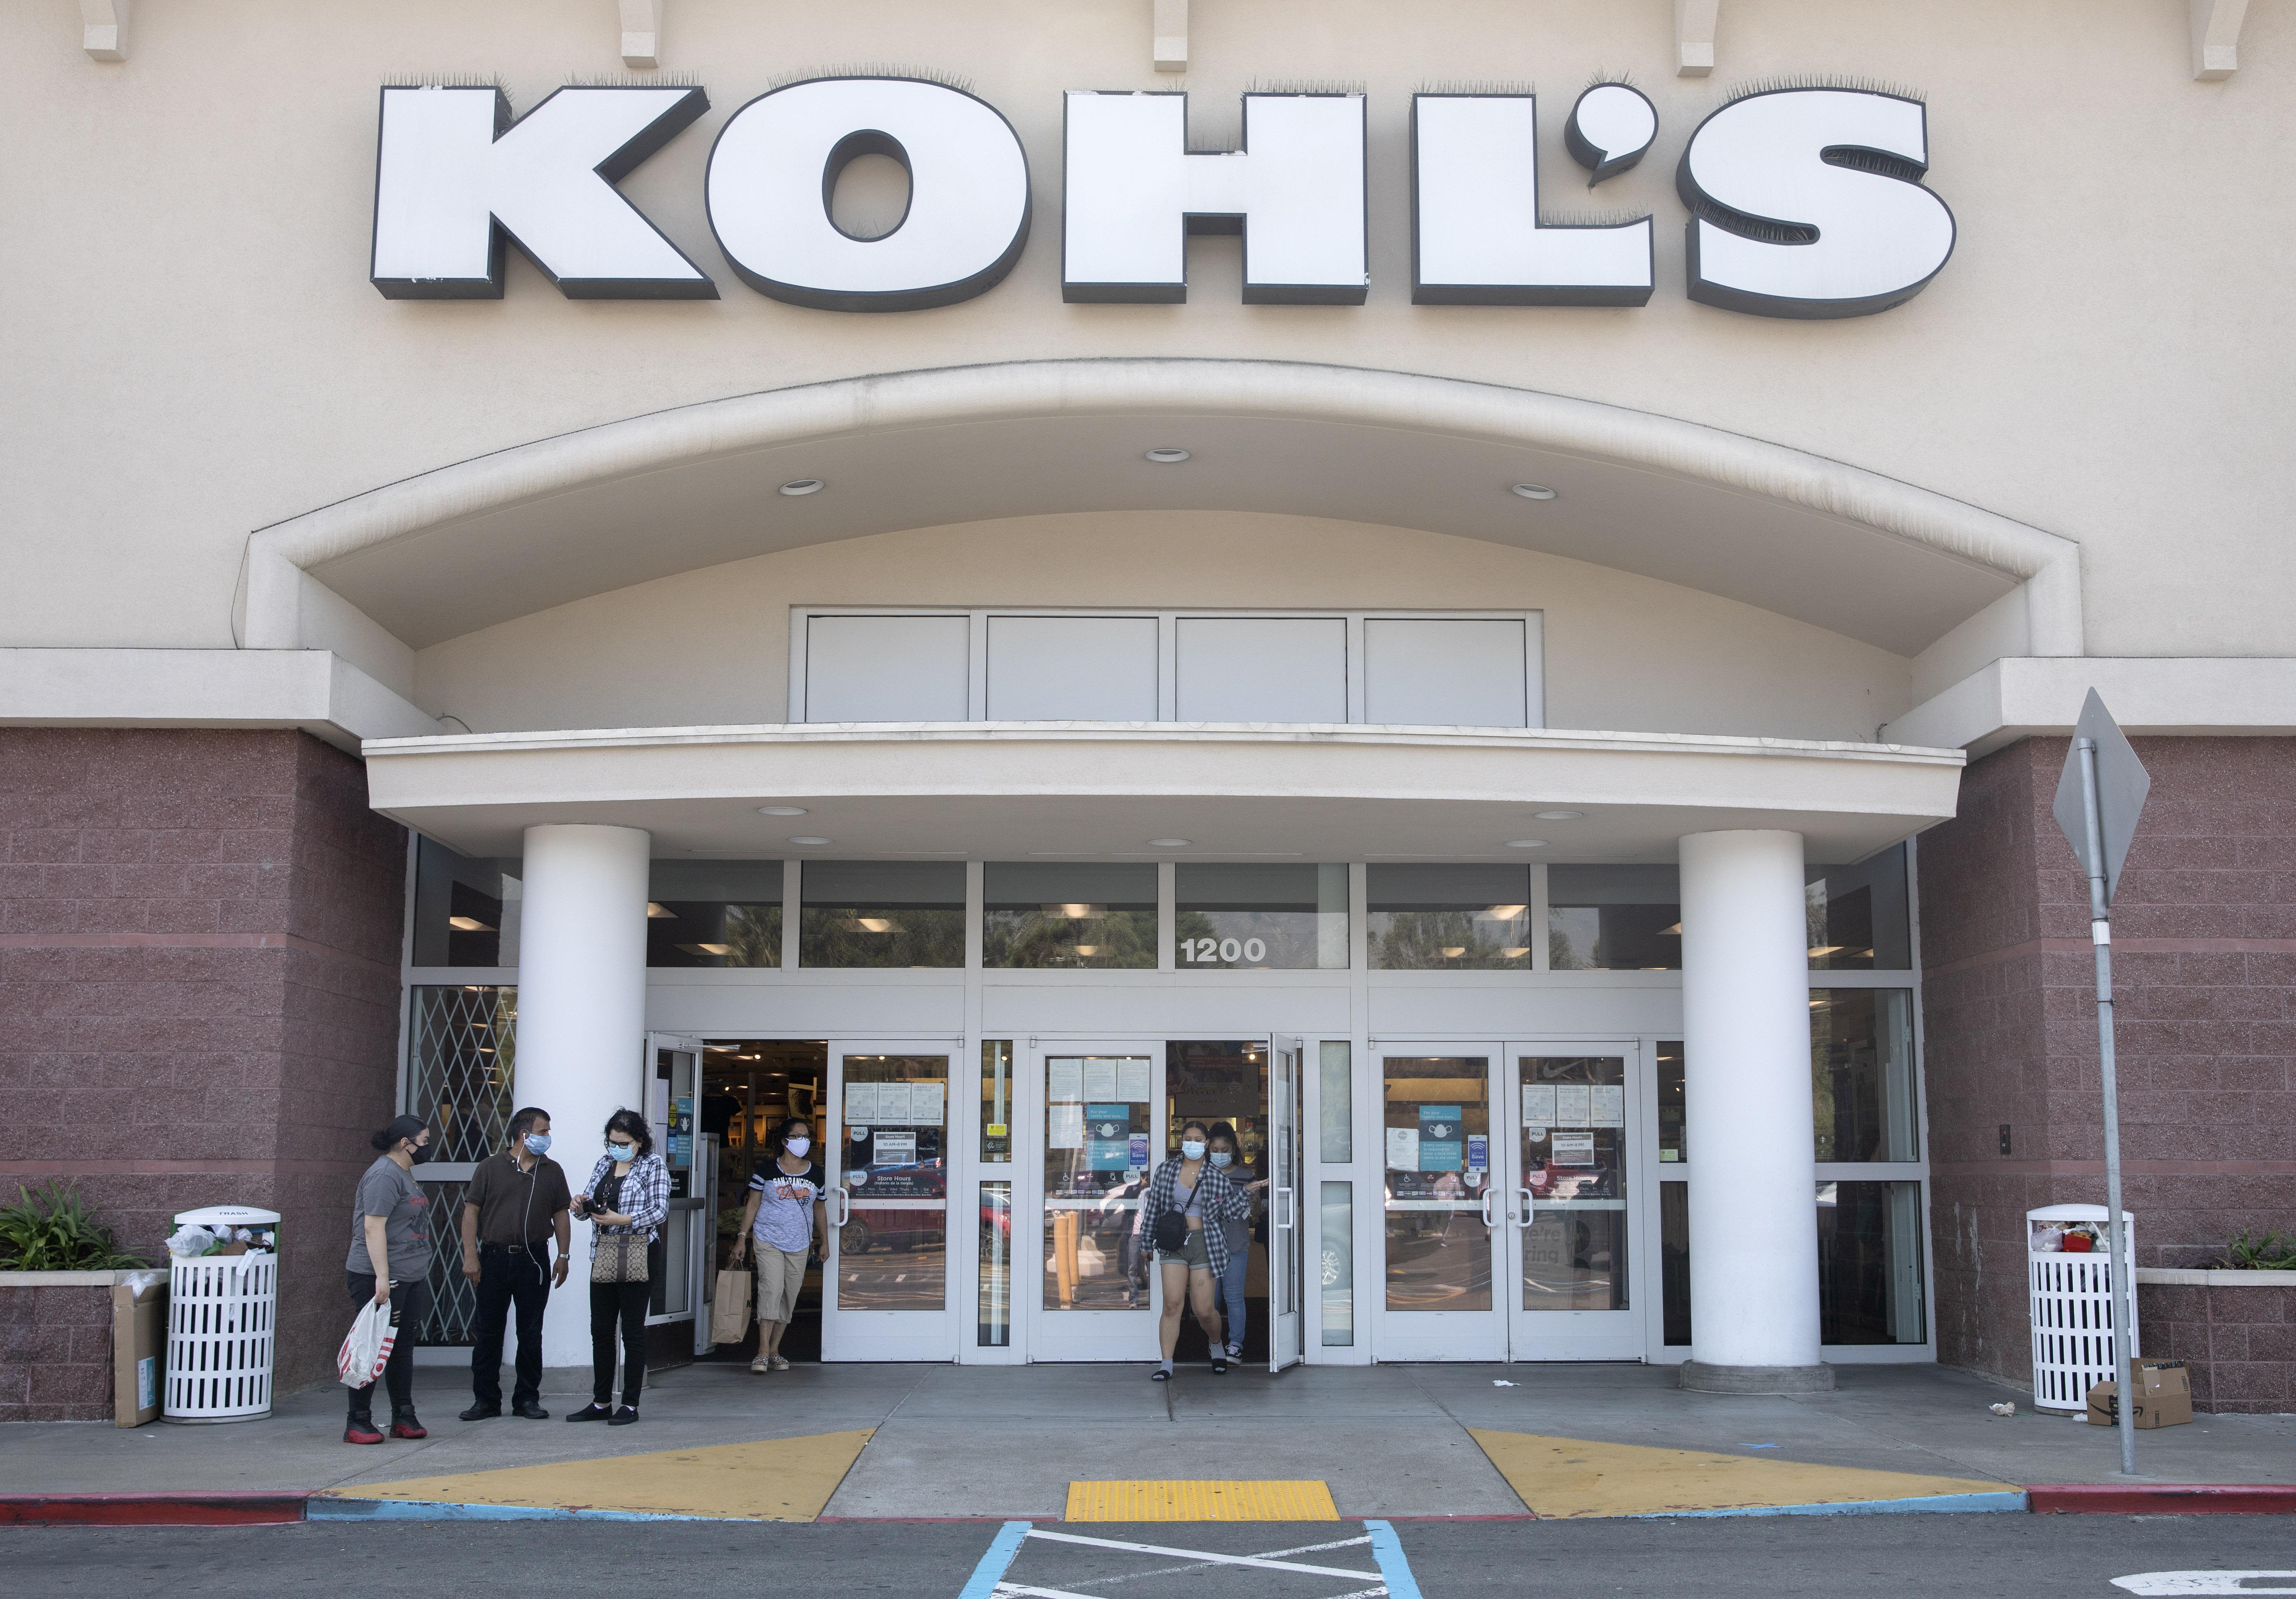 Kohl’s shares surge as takeover offers emerge from suitors including Sycamore